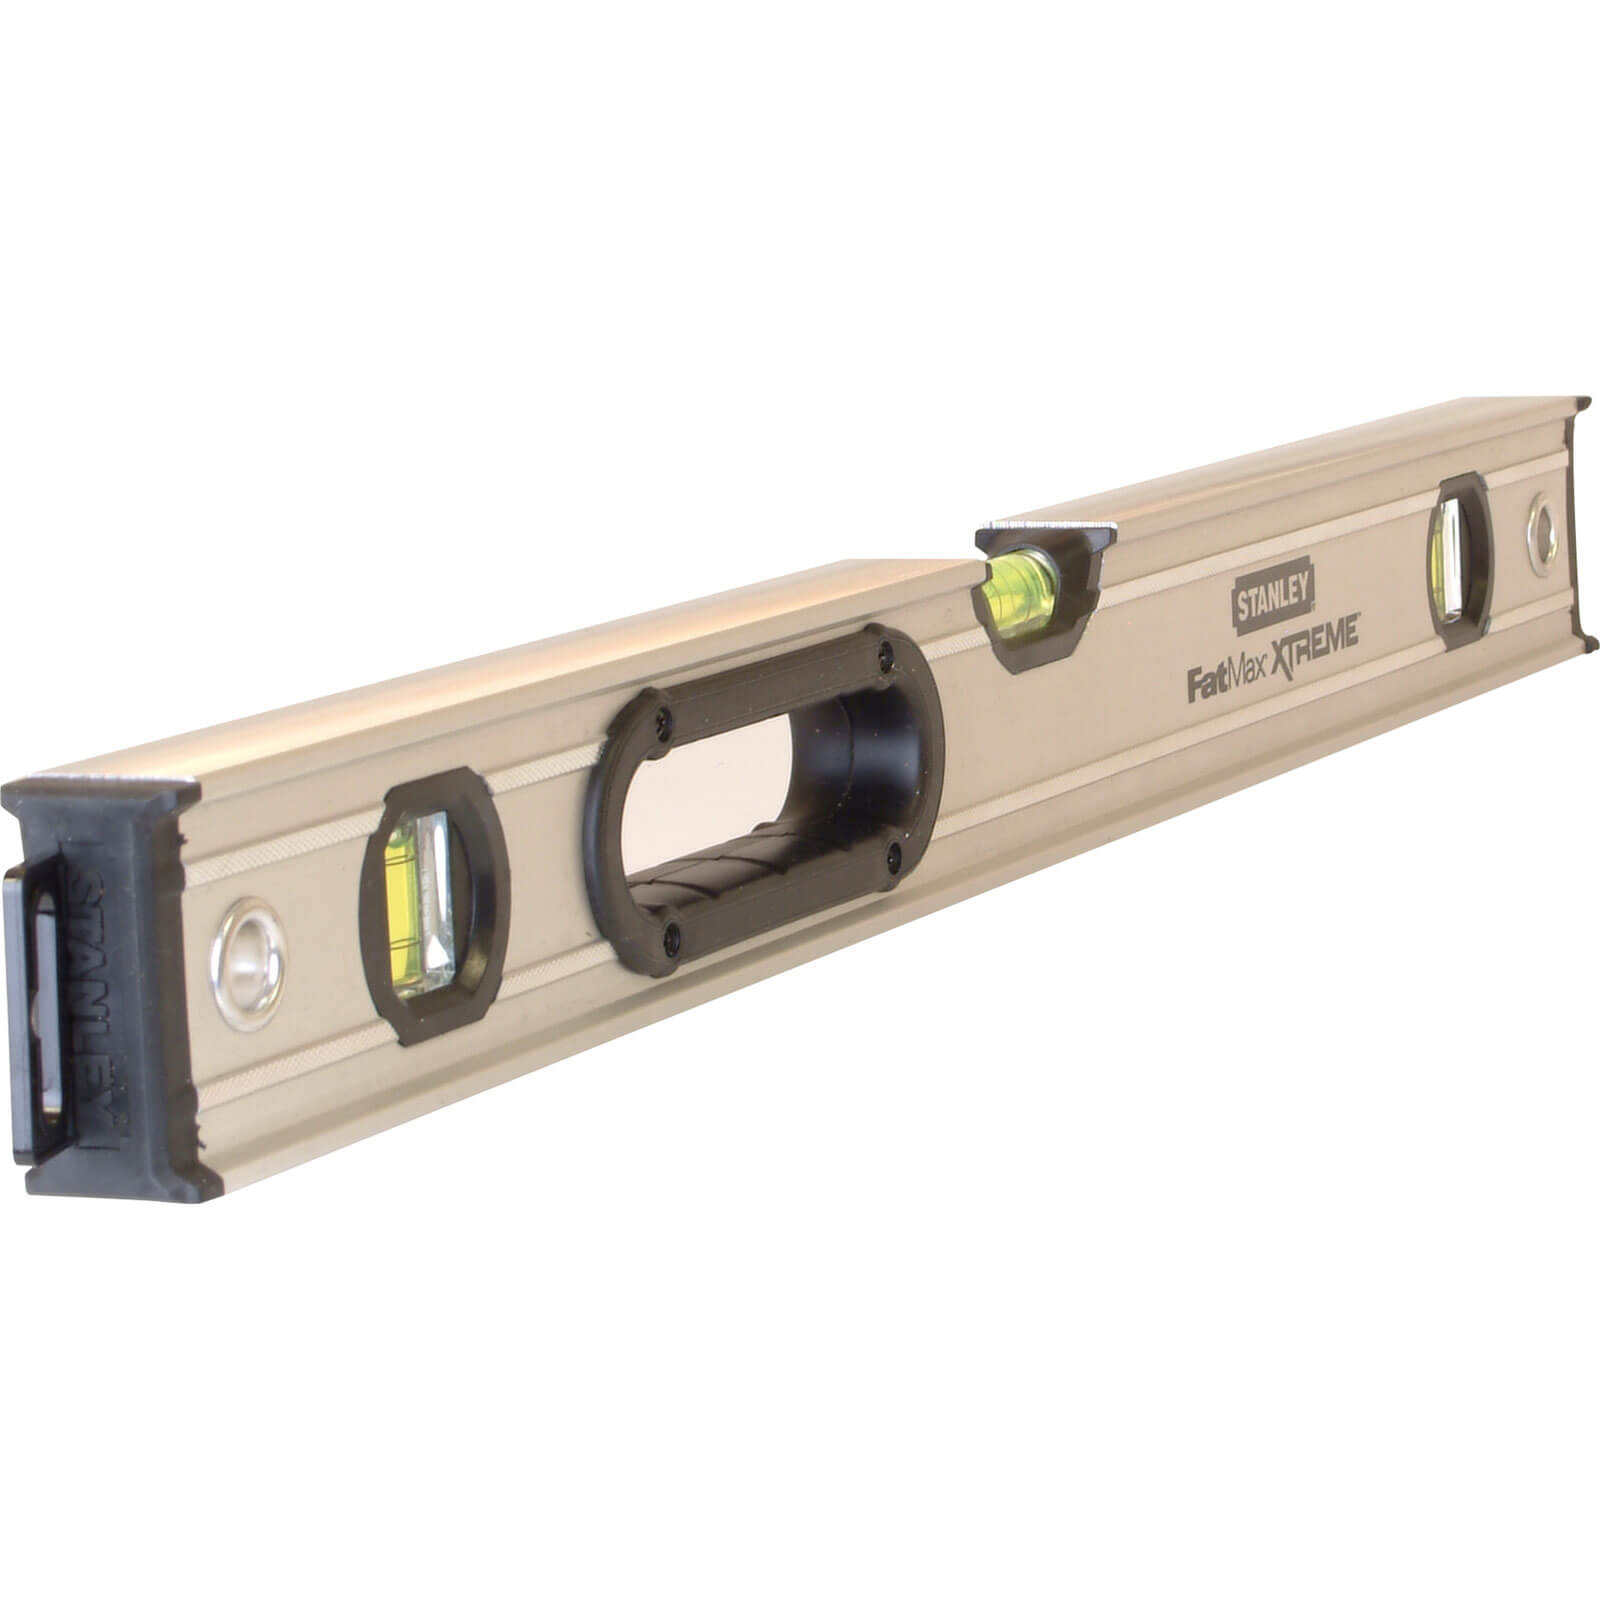 Image of Stanley FatMax Xtreme Magnetic Spirit Level 24" / 60cm